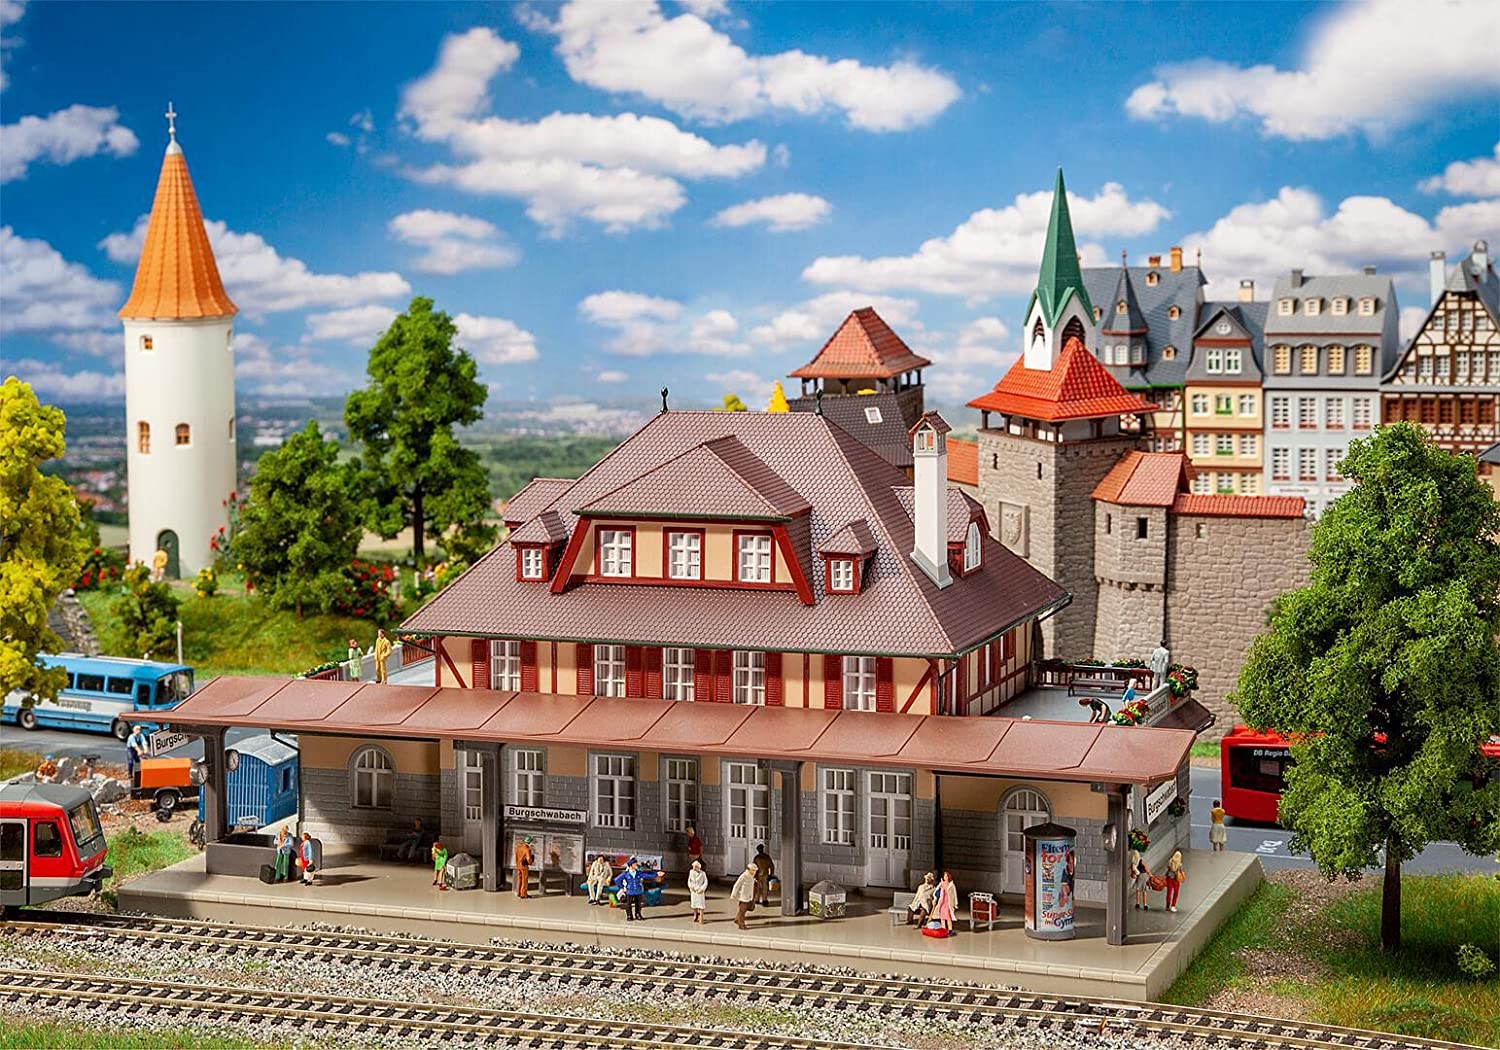 191761 Faller HO Scale 1:87 Kit of Burgschwabach Station - New 2021 - Limited Edition